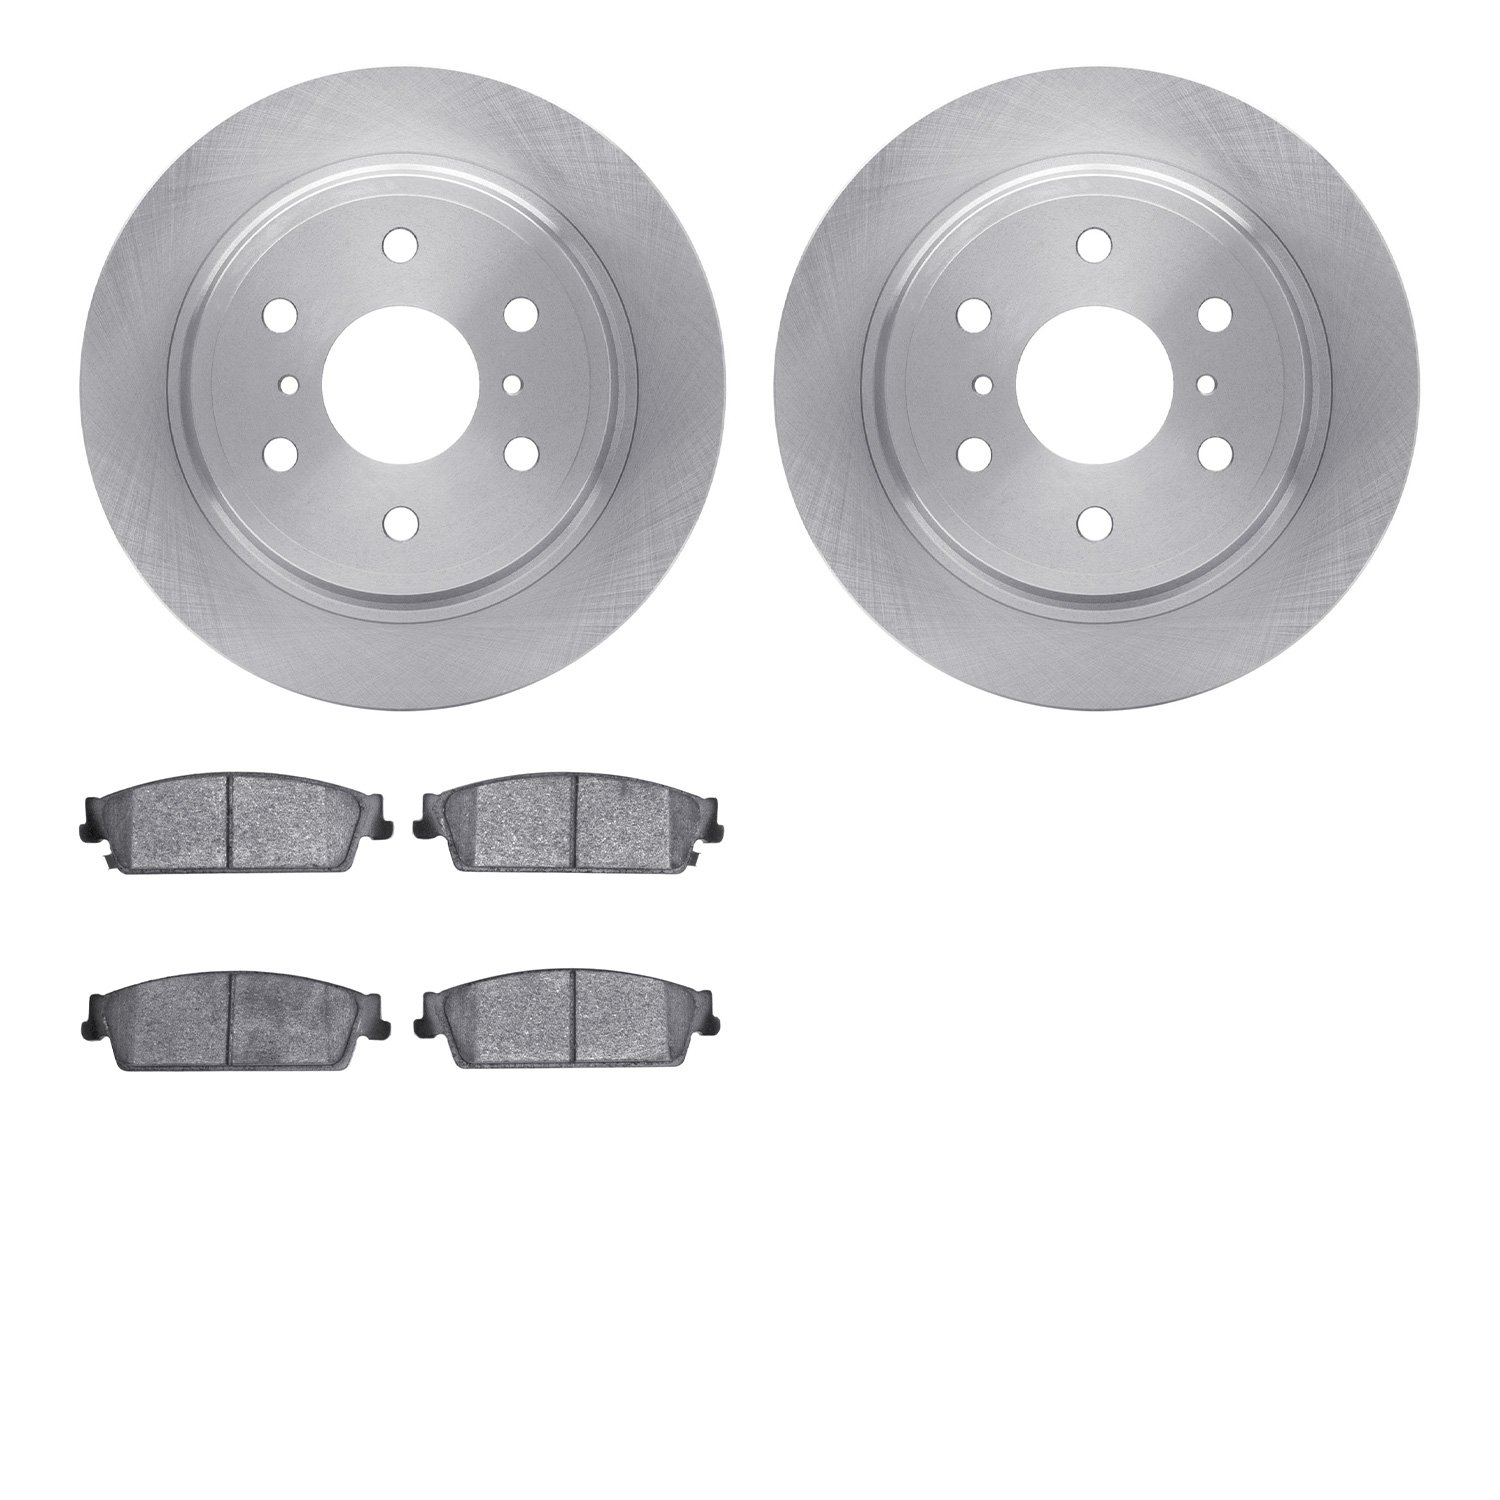 6402-48112 Brake Rotors with Ultimate-Duty Brake Pads, 2007-2014 GM, Position: Rear